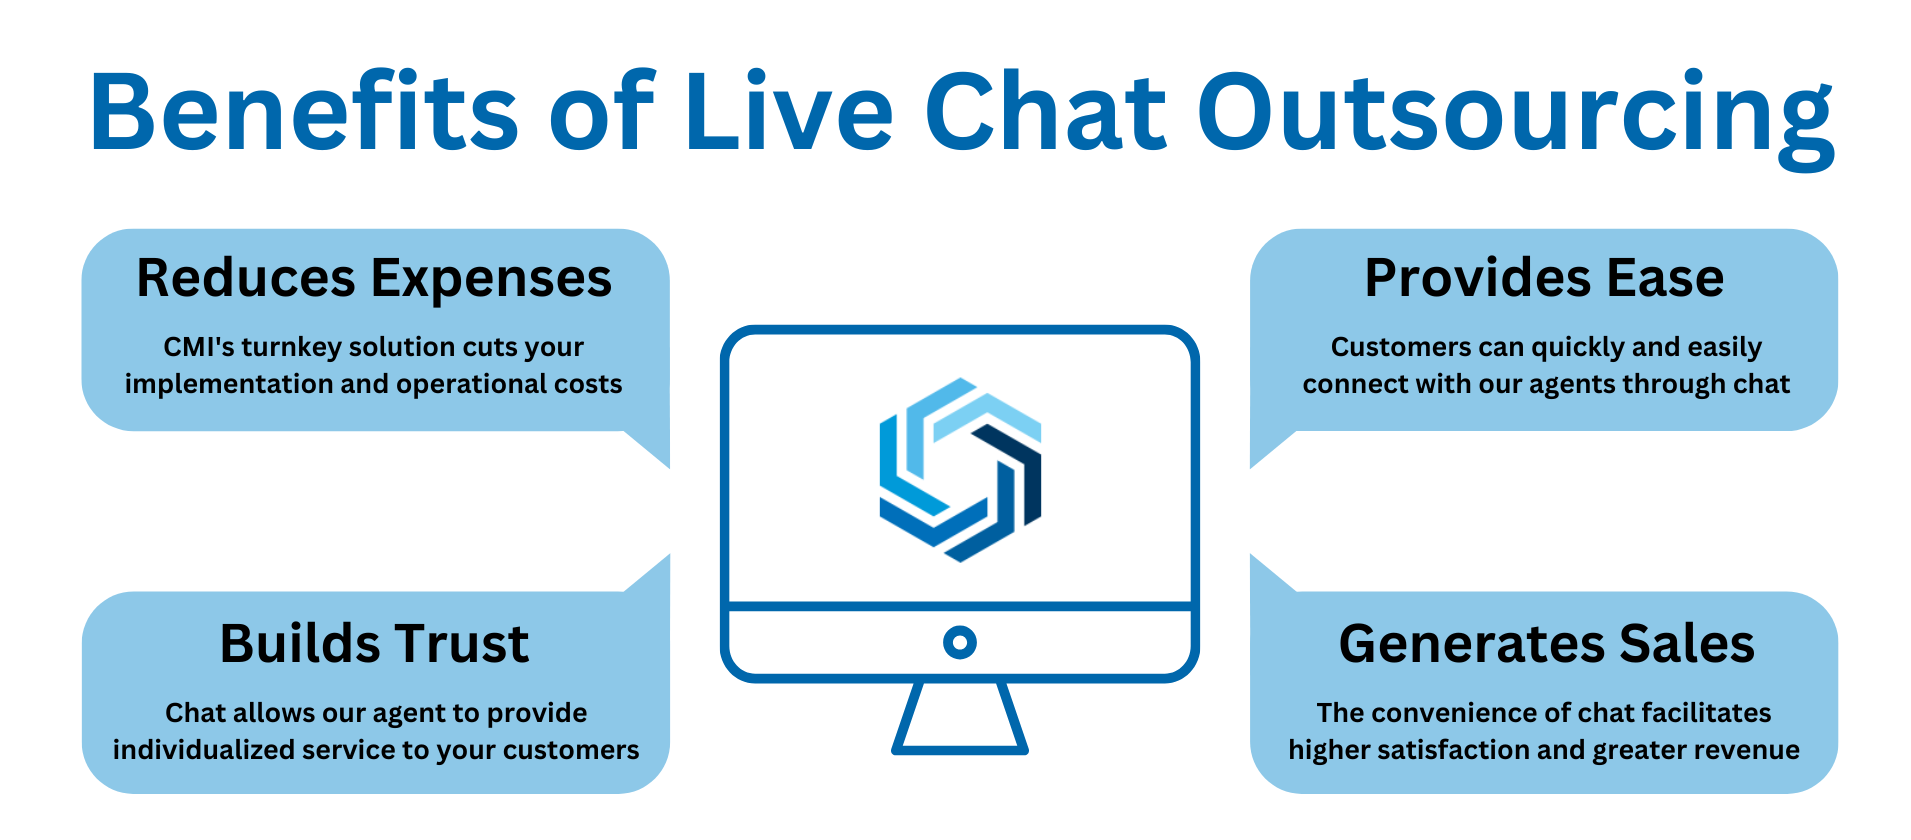 Benefits of Live Chat Outsourcing